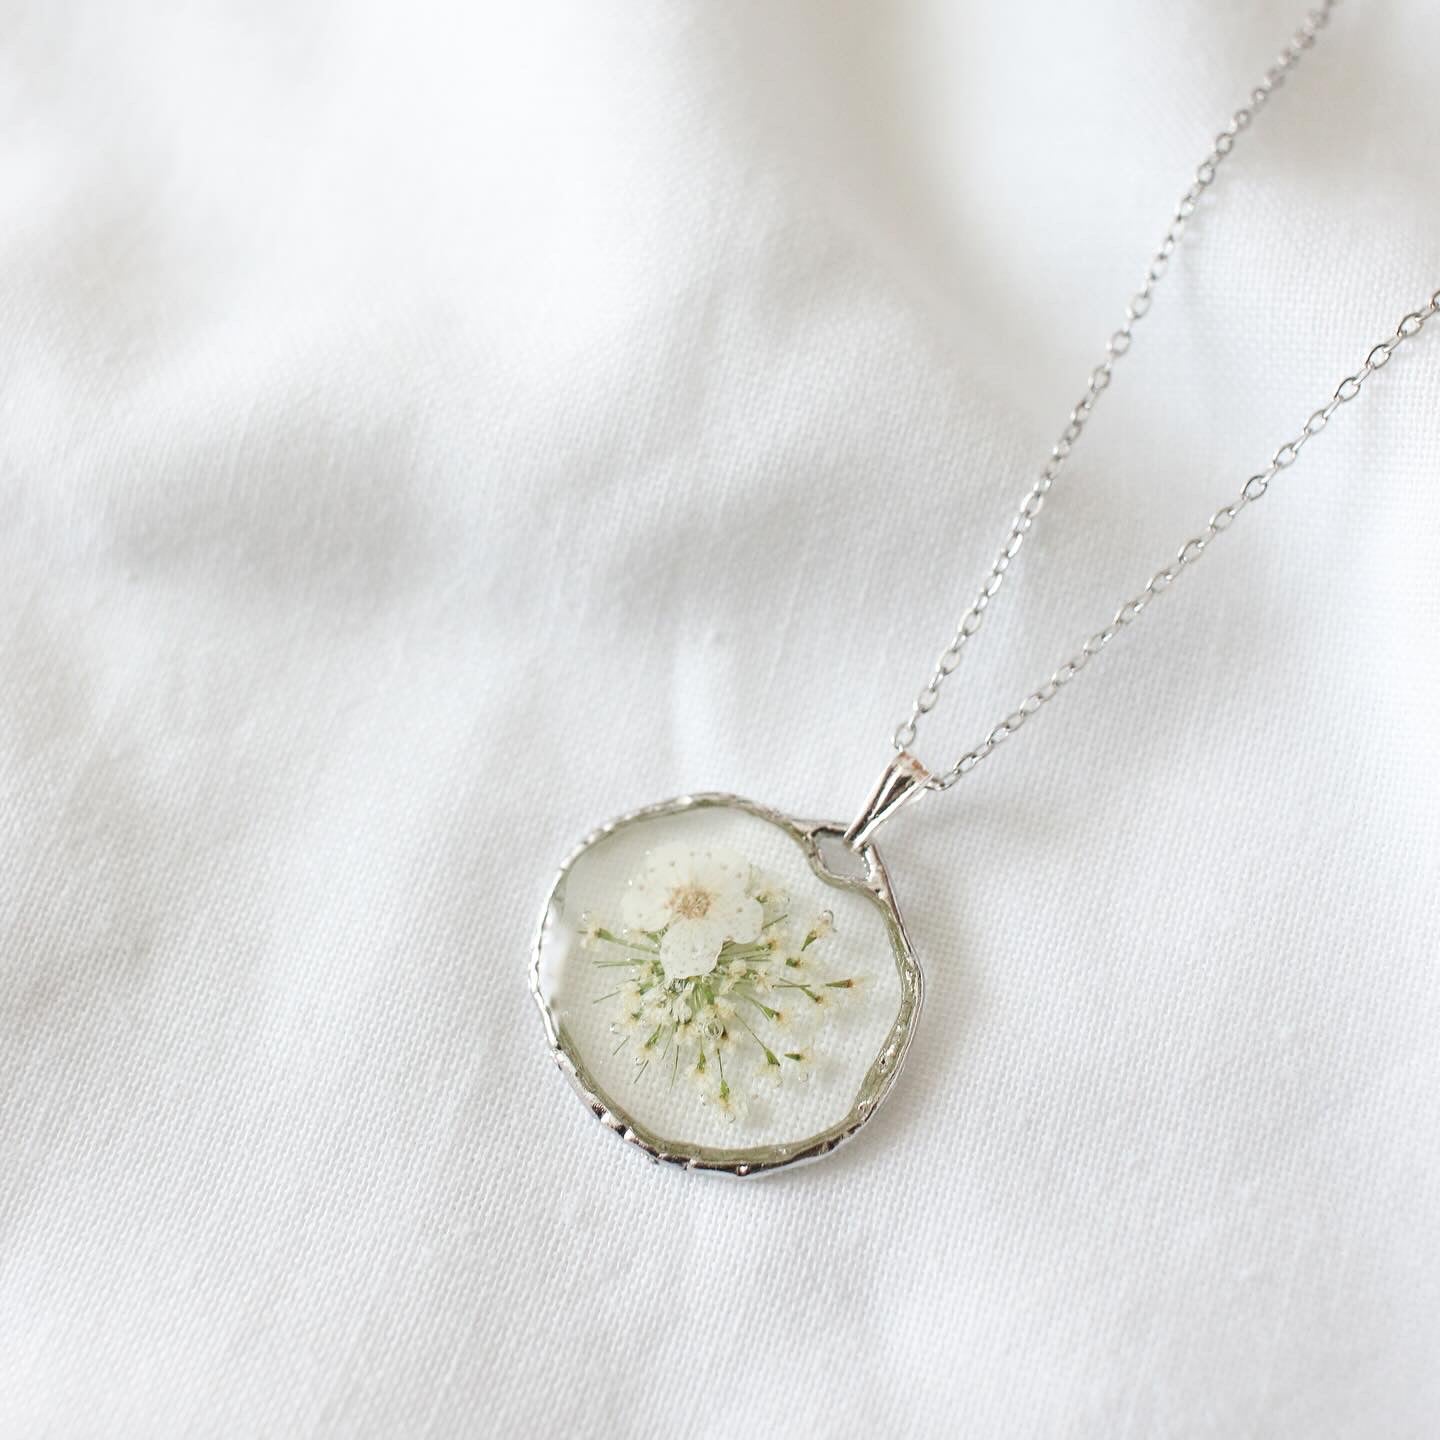 The Trouvaille White Narcissus Necklace in Silver